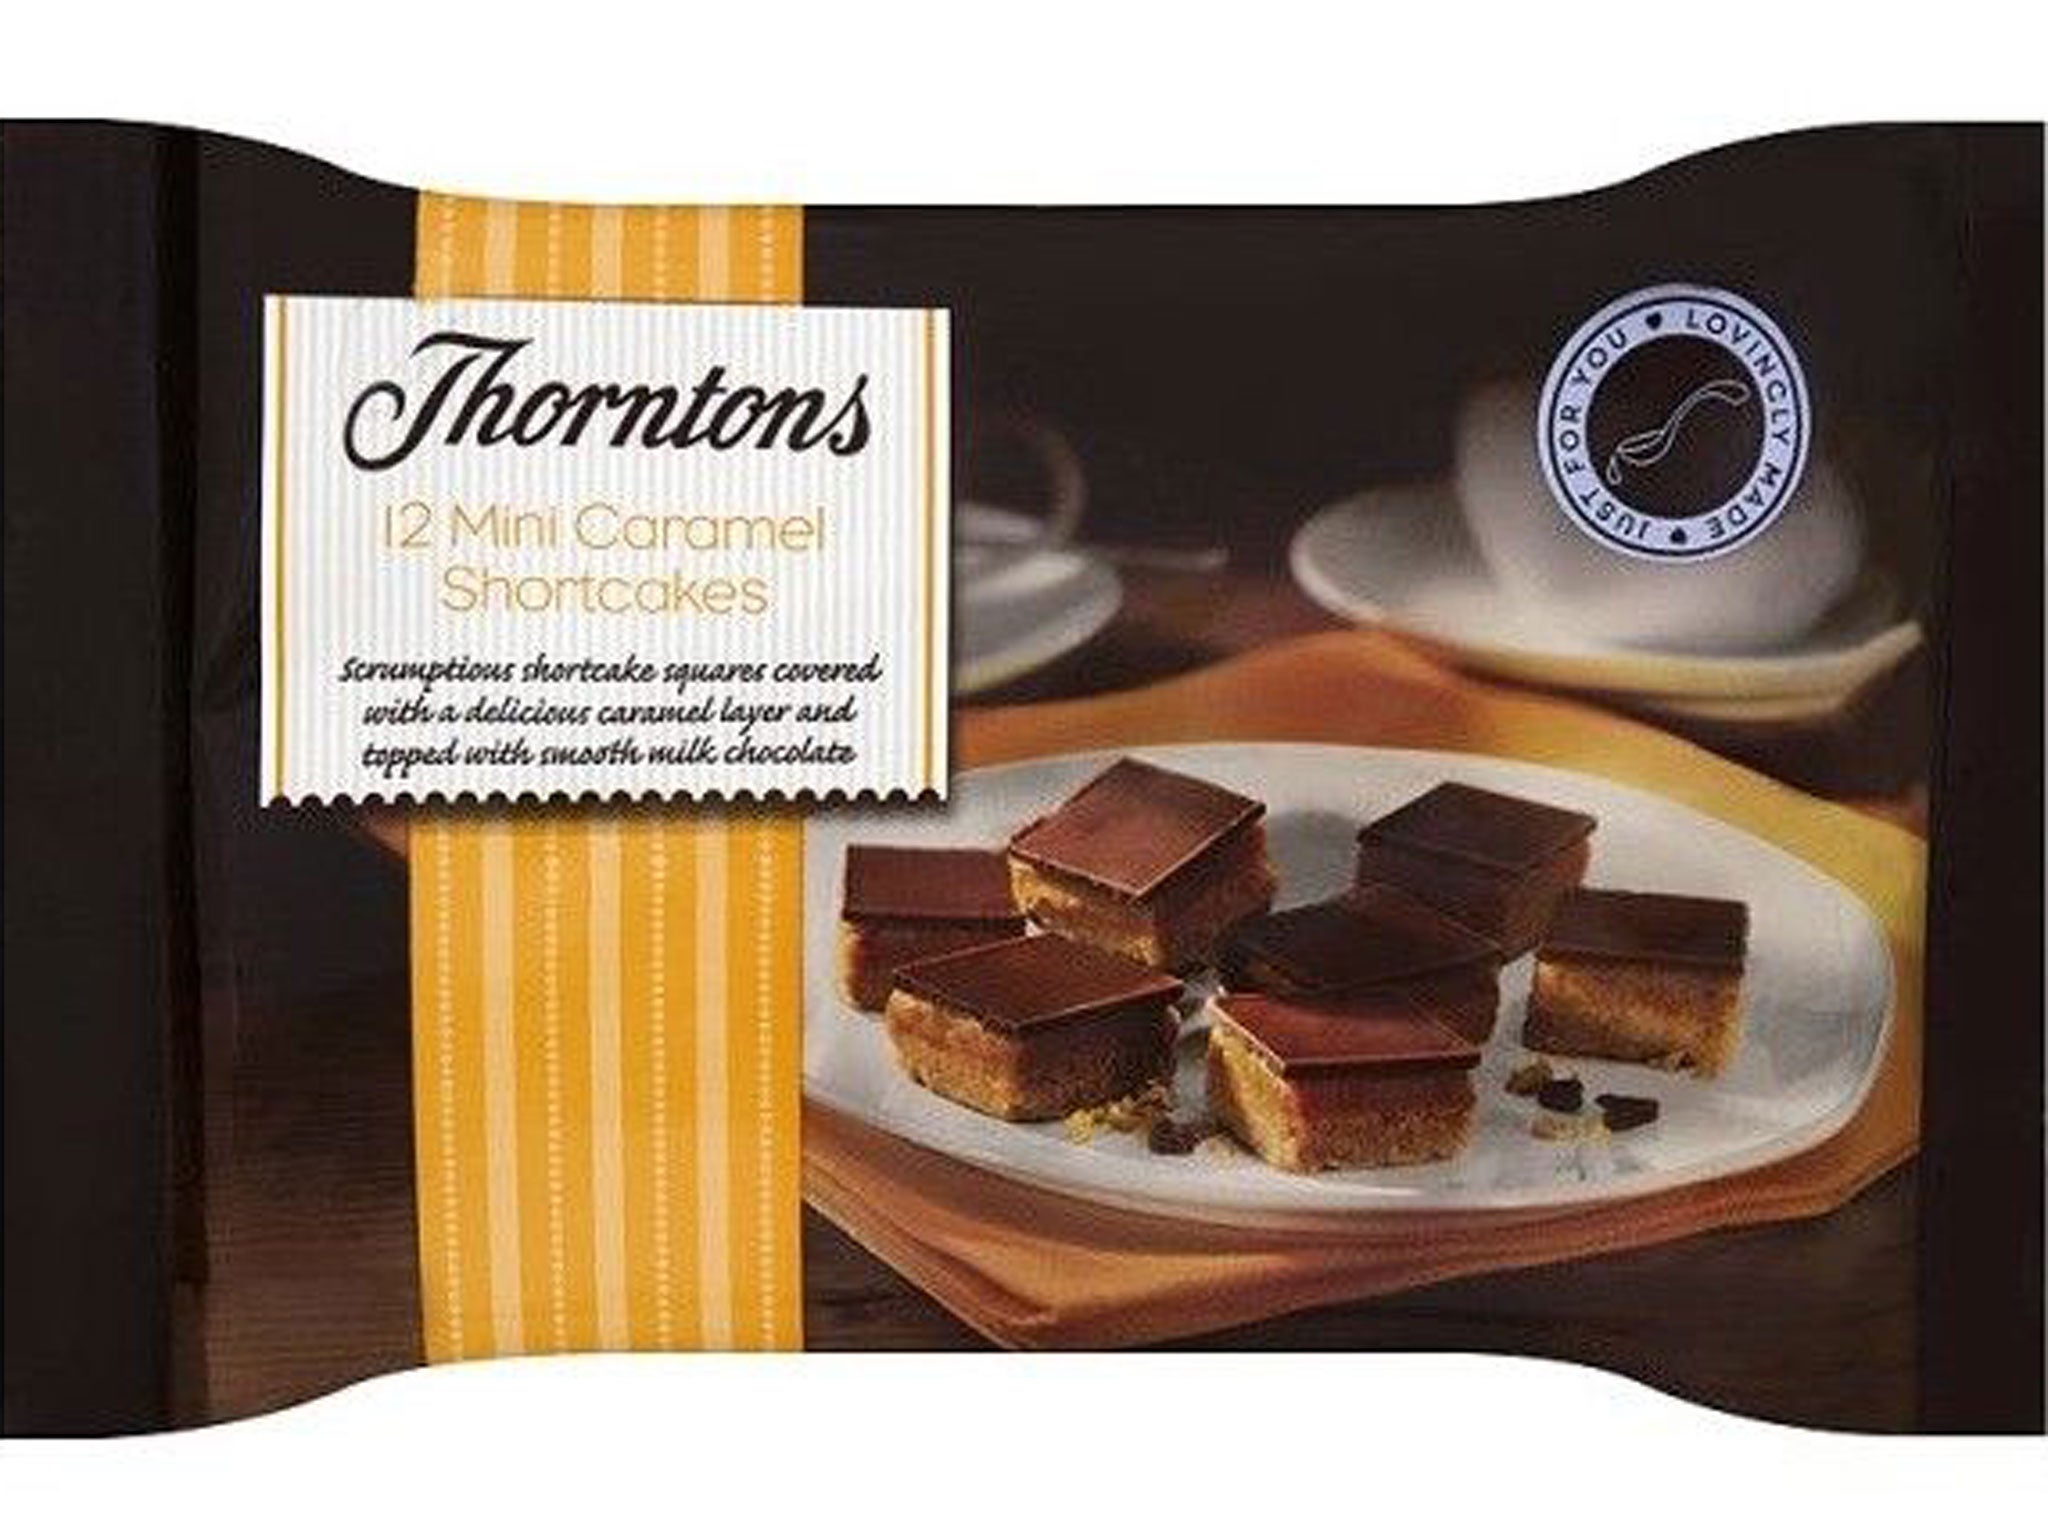 Thorntons Mini Caramel Shortcakes: A pack of 12 in Waitrose rose to £1.50 from £1.40 after shrinking to just 10